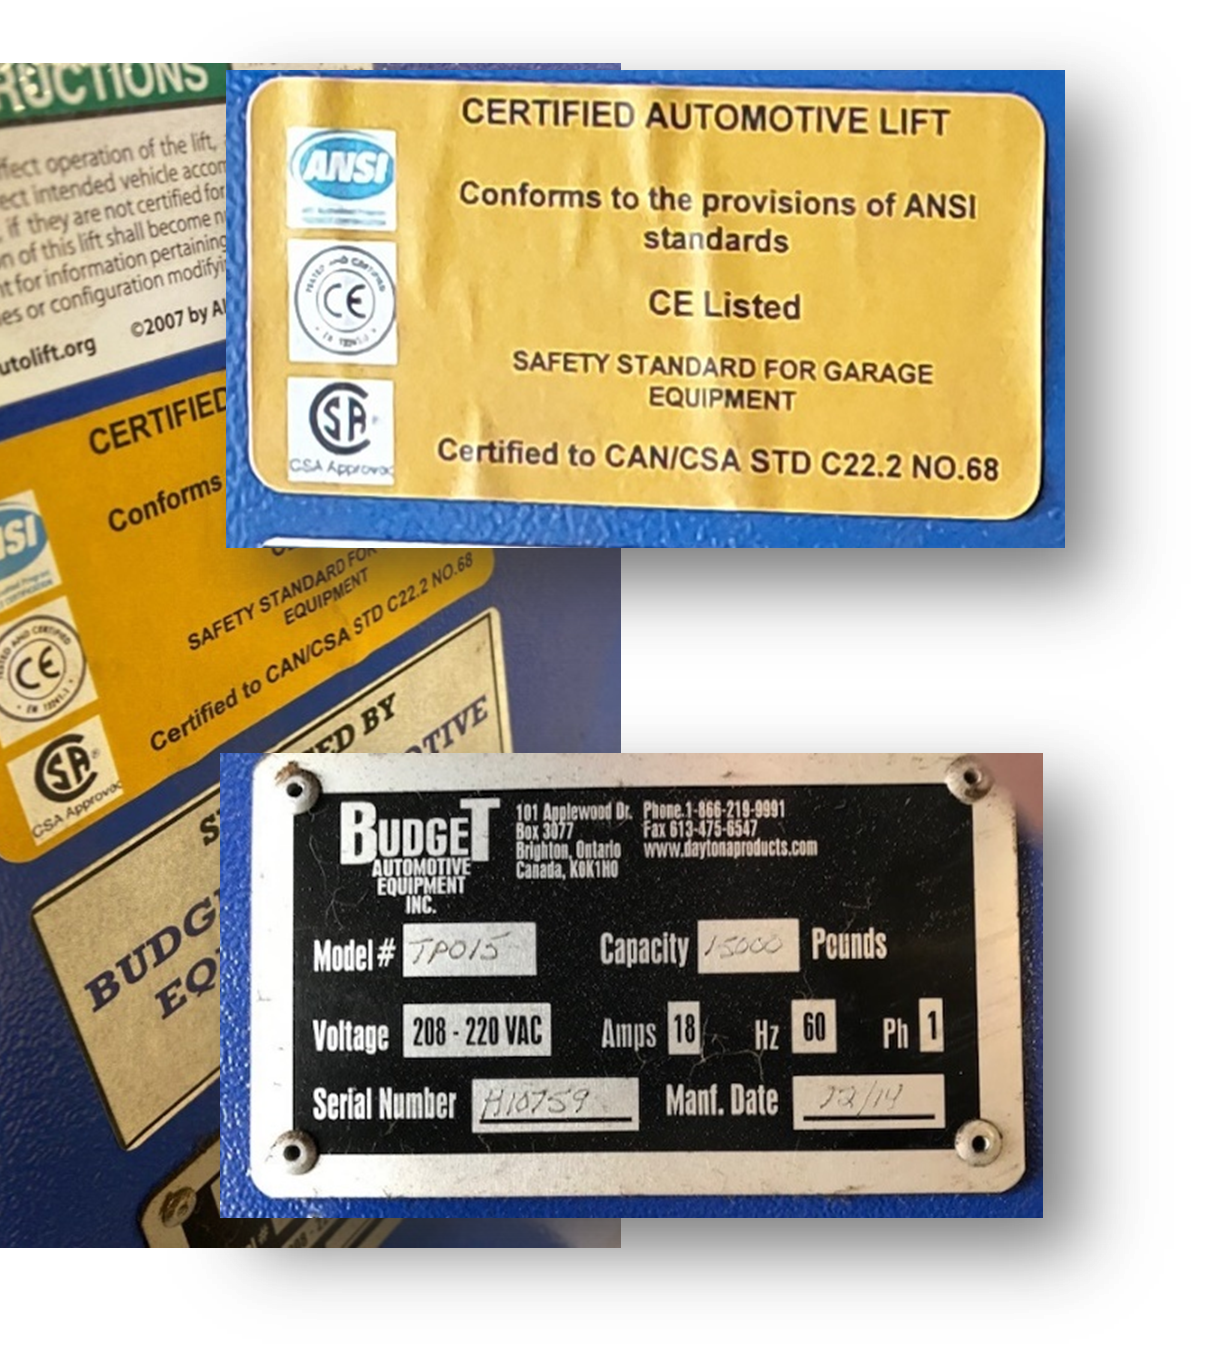 ALI Warns of Counterfeit Lift Certification Labels | THE SHOP